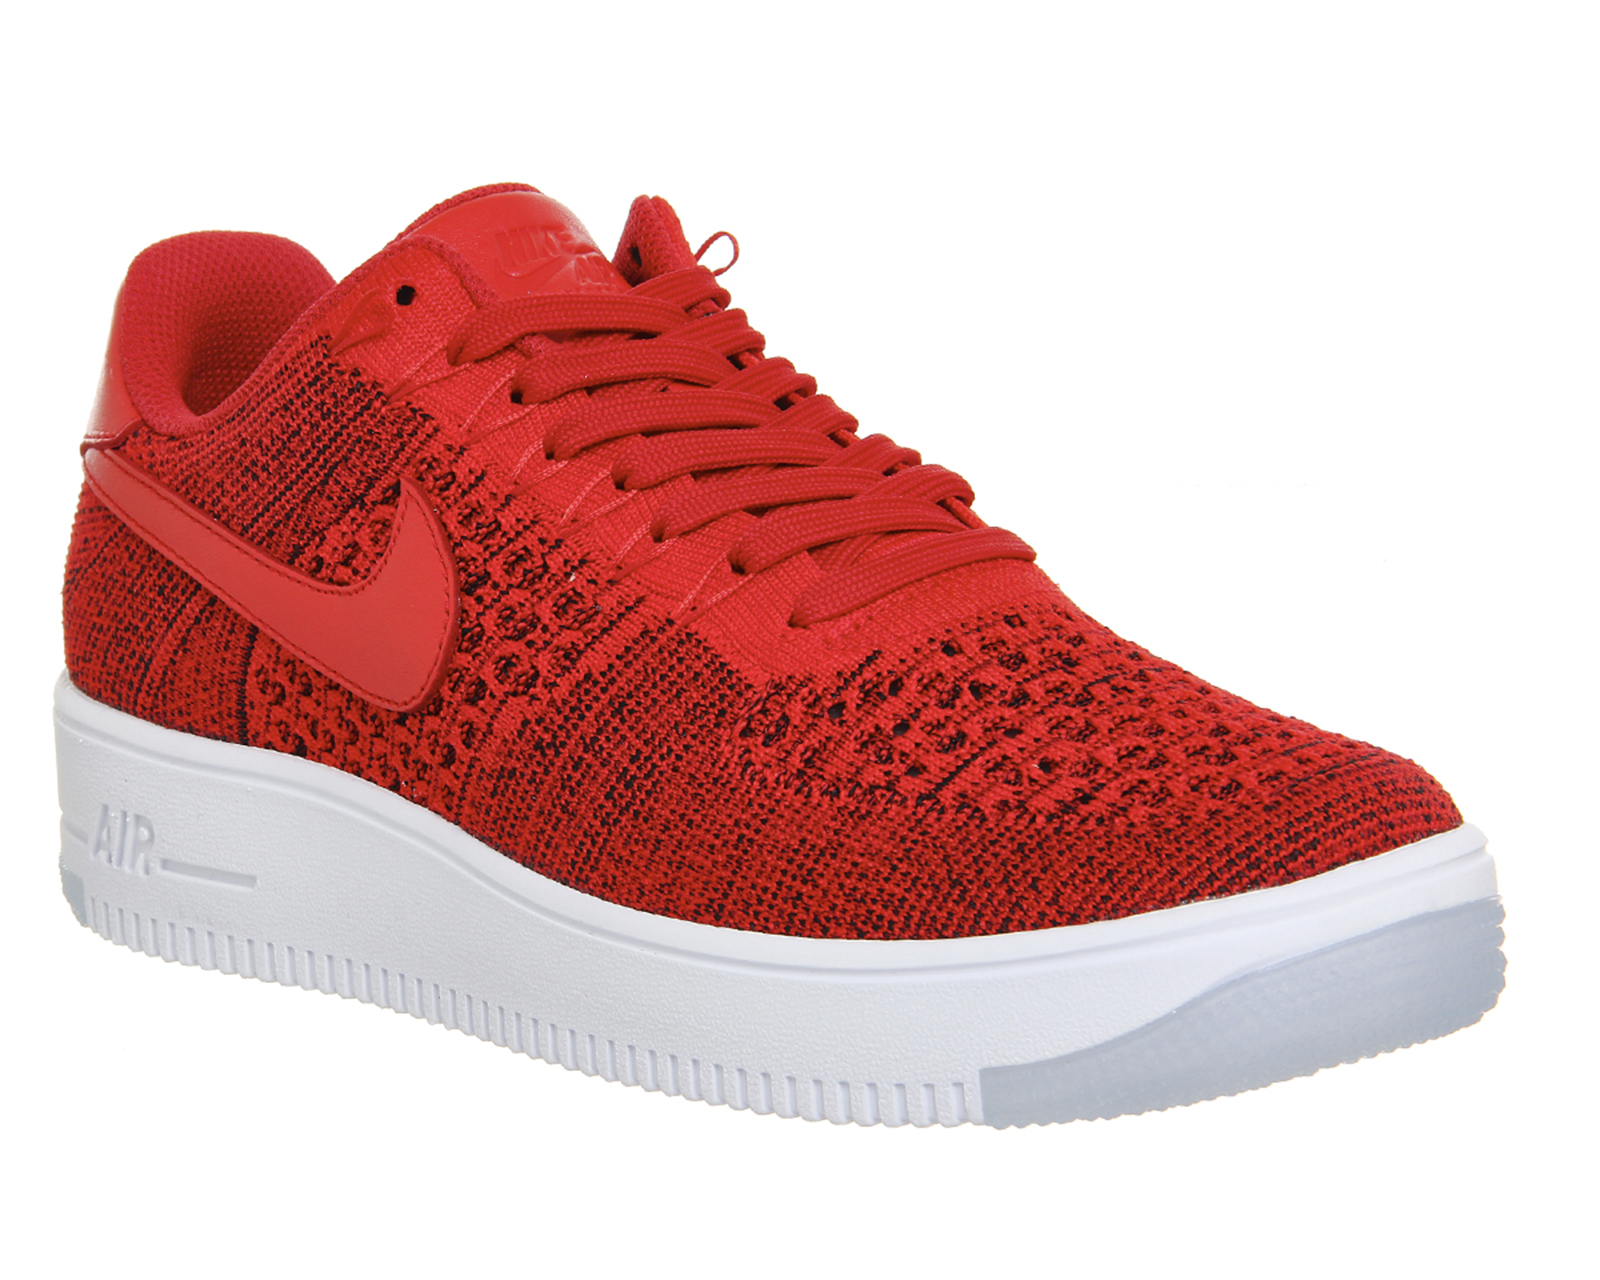 nike air force 1 ultra flyknit red, heavy trade 85% off - statehouse.gov.sl